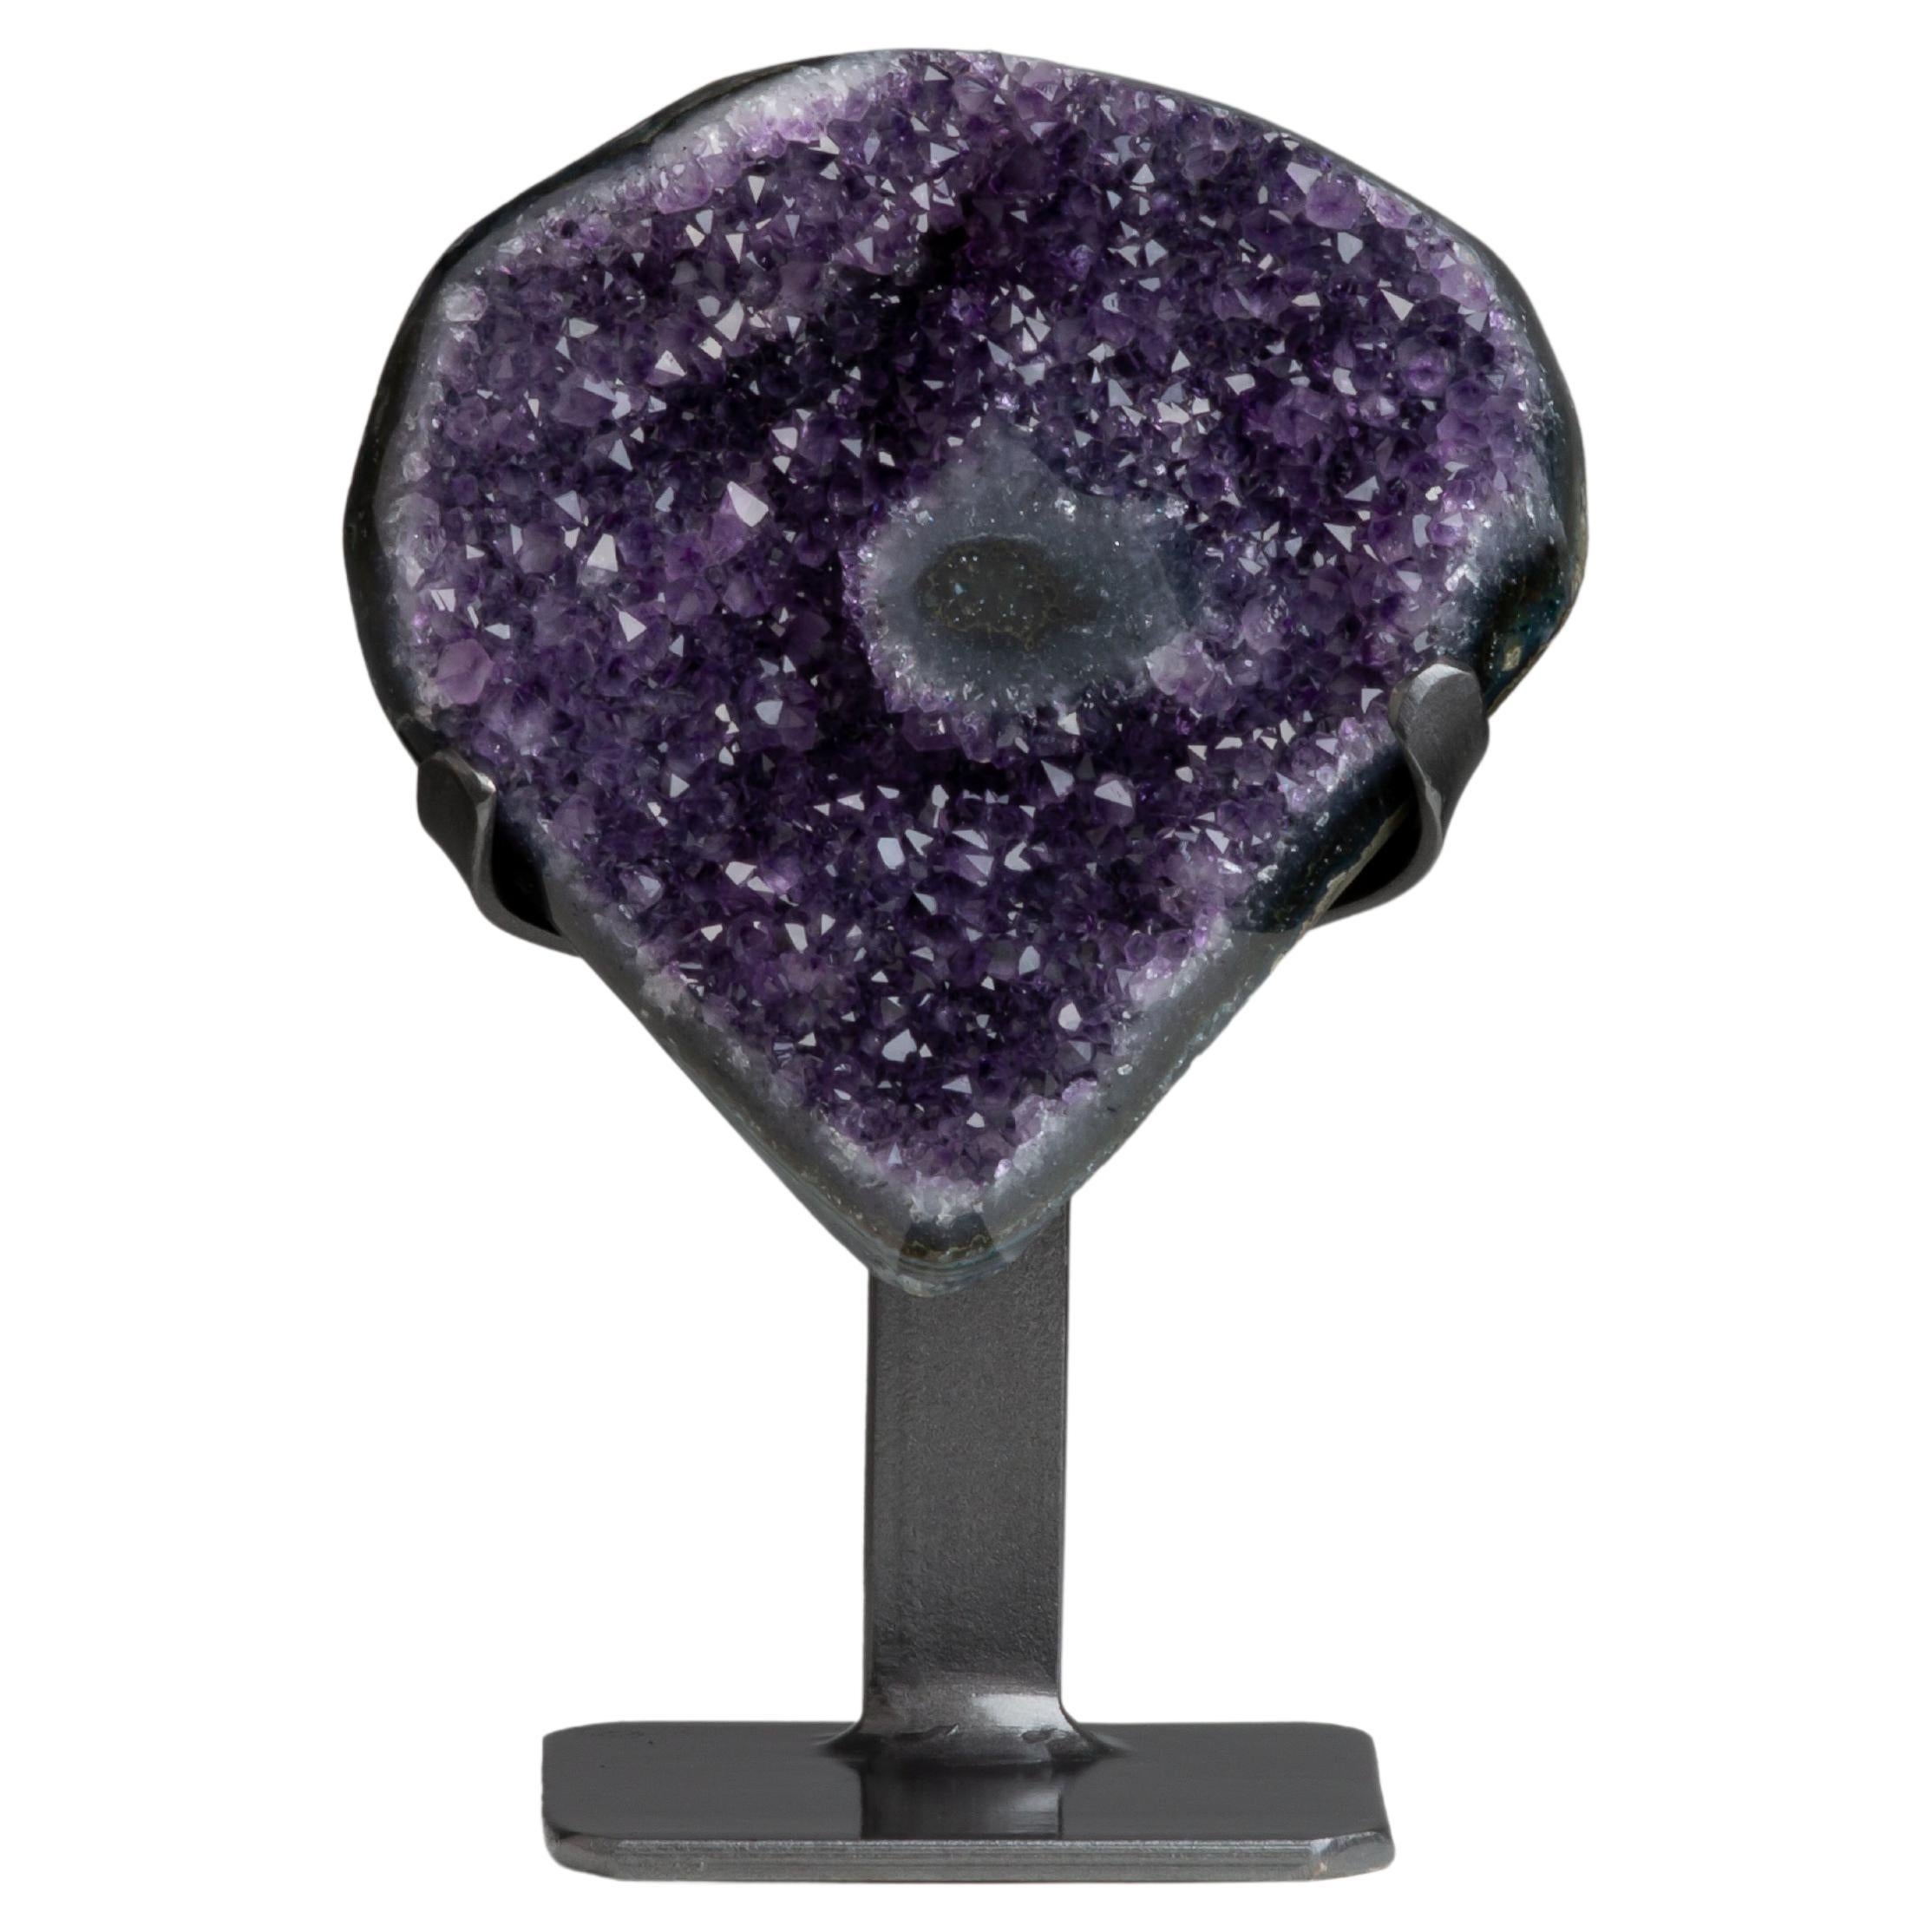 Heart Shaped Amethyst Formation with Central Stalactite "EYE" and Agate Border For Sale